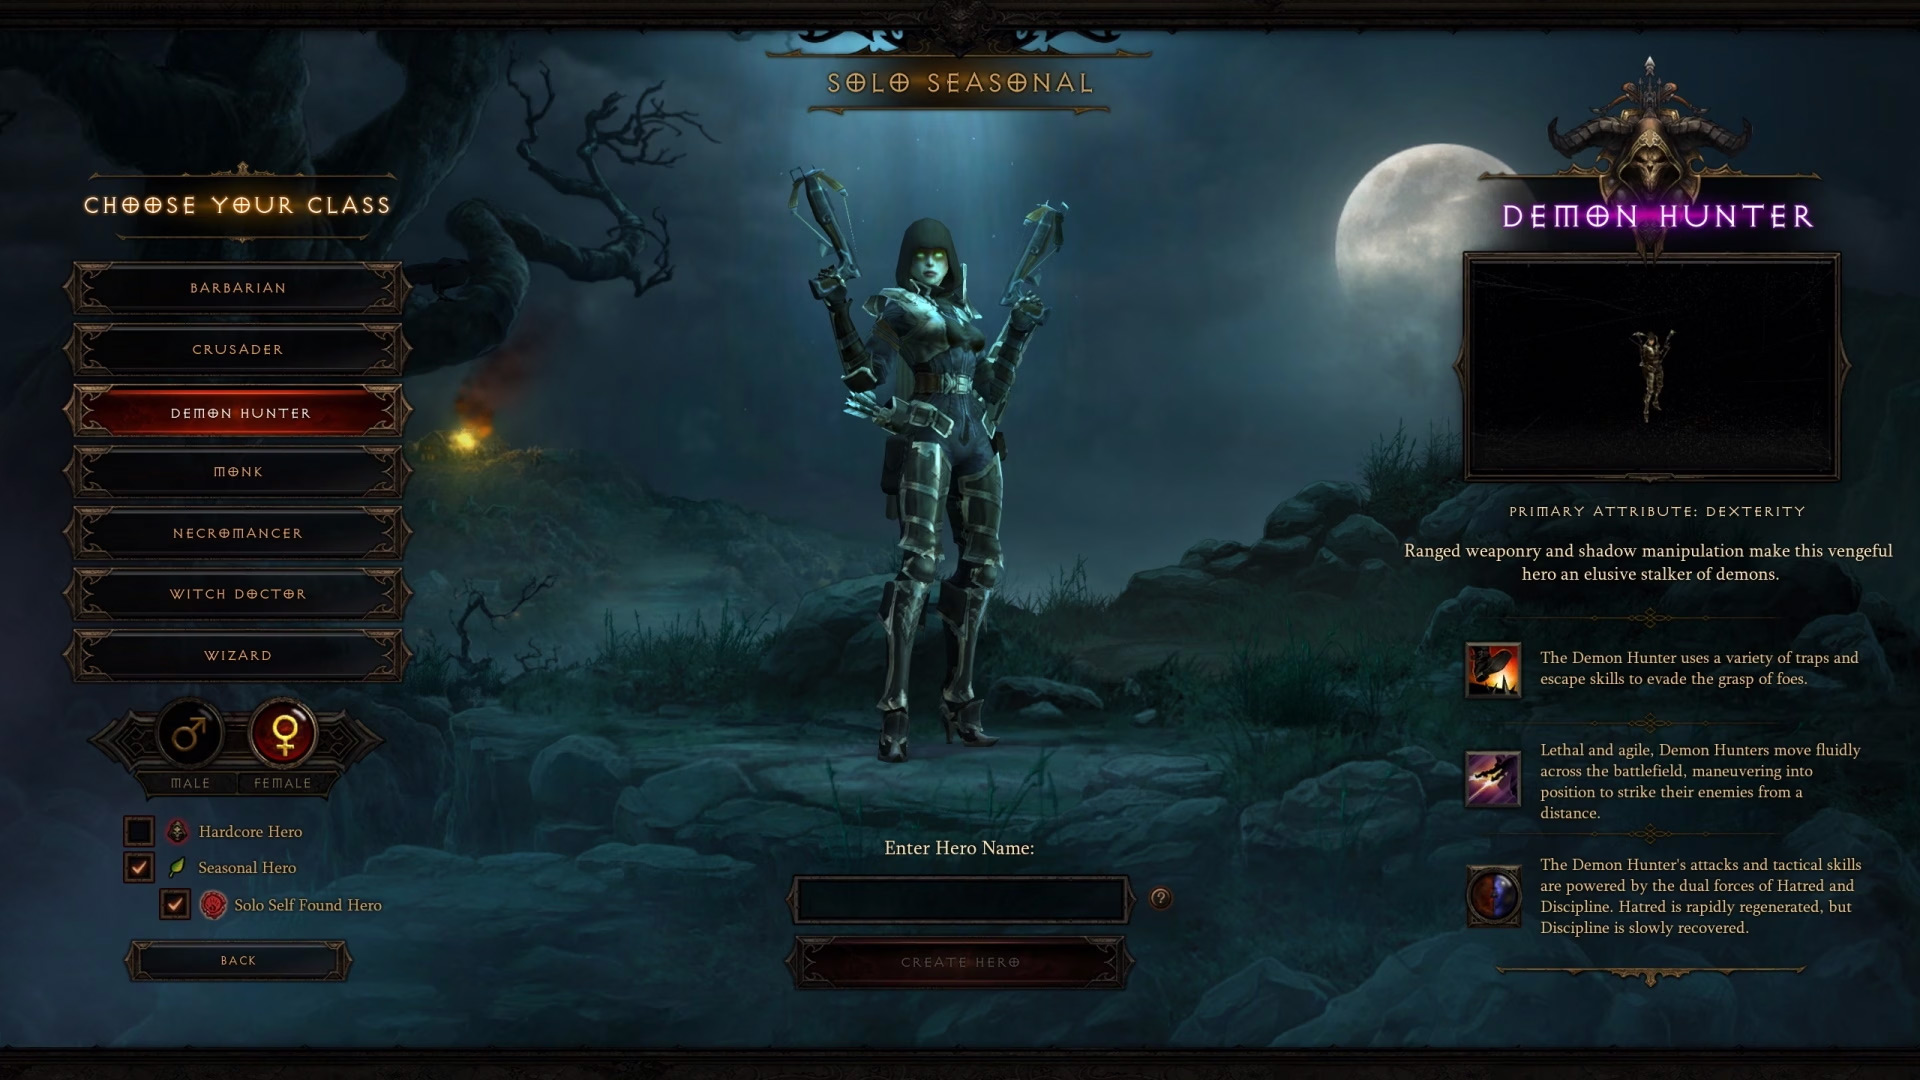 Diablo III Season 29 and Patch 2.7.6 are designed with Solo Self Found in mind